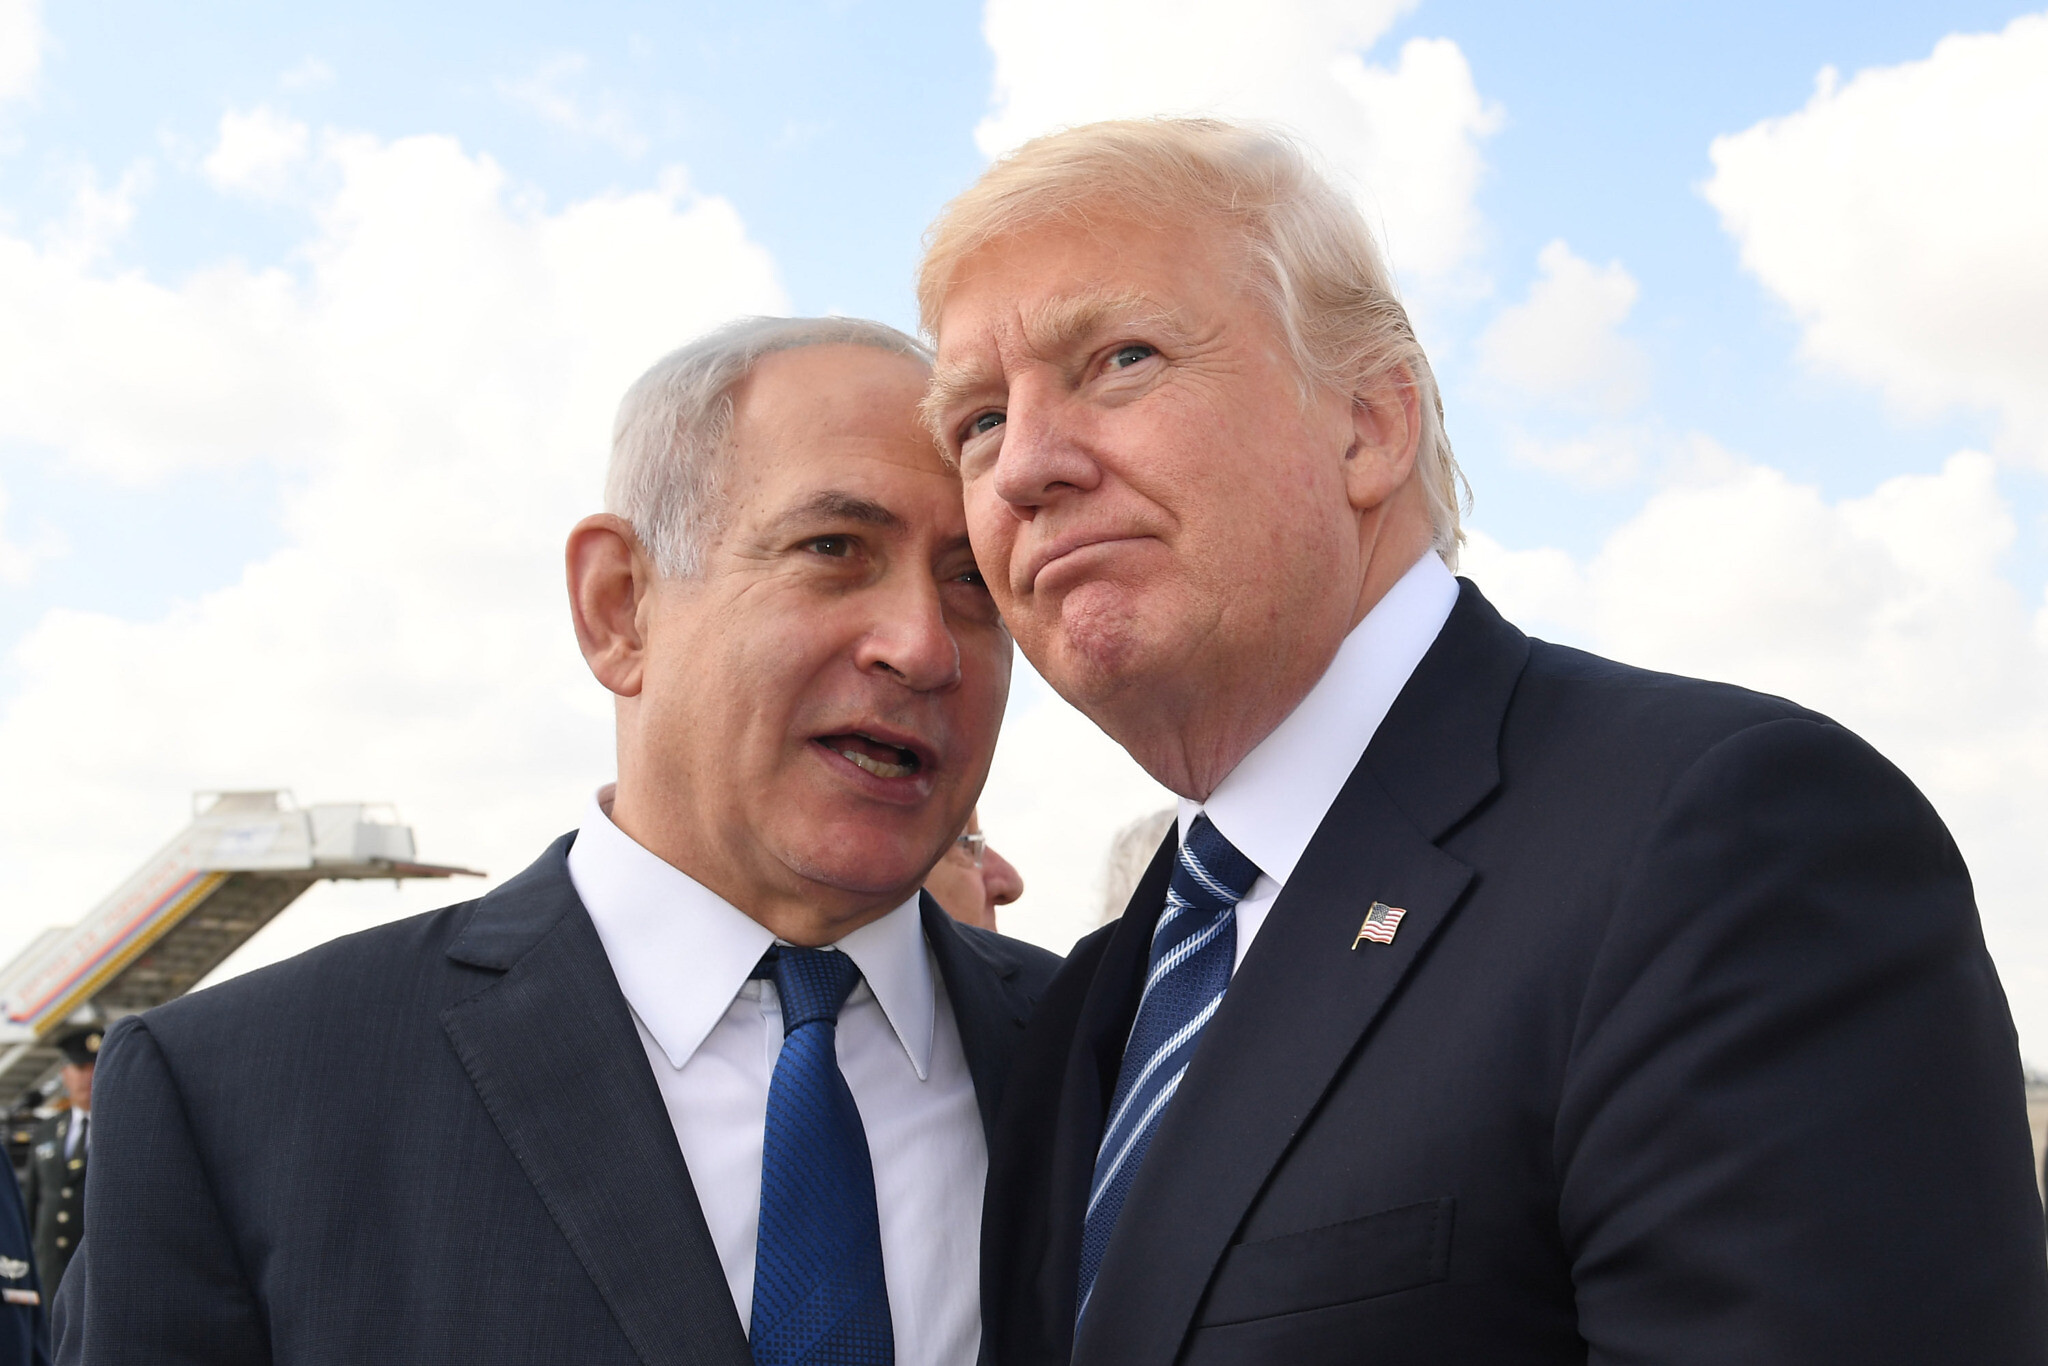 Savaged by Trump, Netanyahu says he had to congratulate Biden on election  victory | The Times of Israel